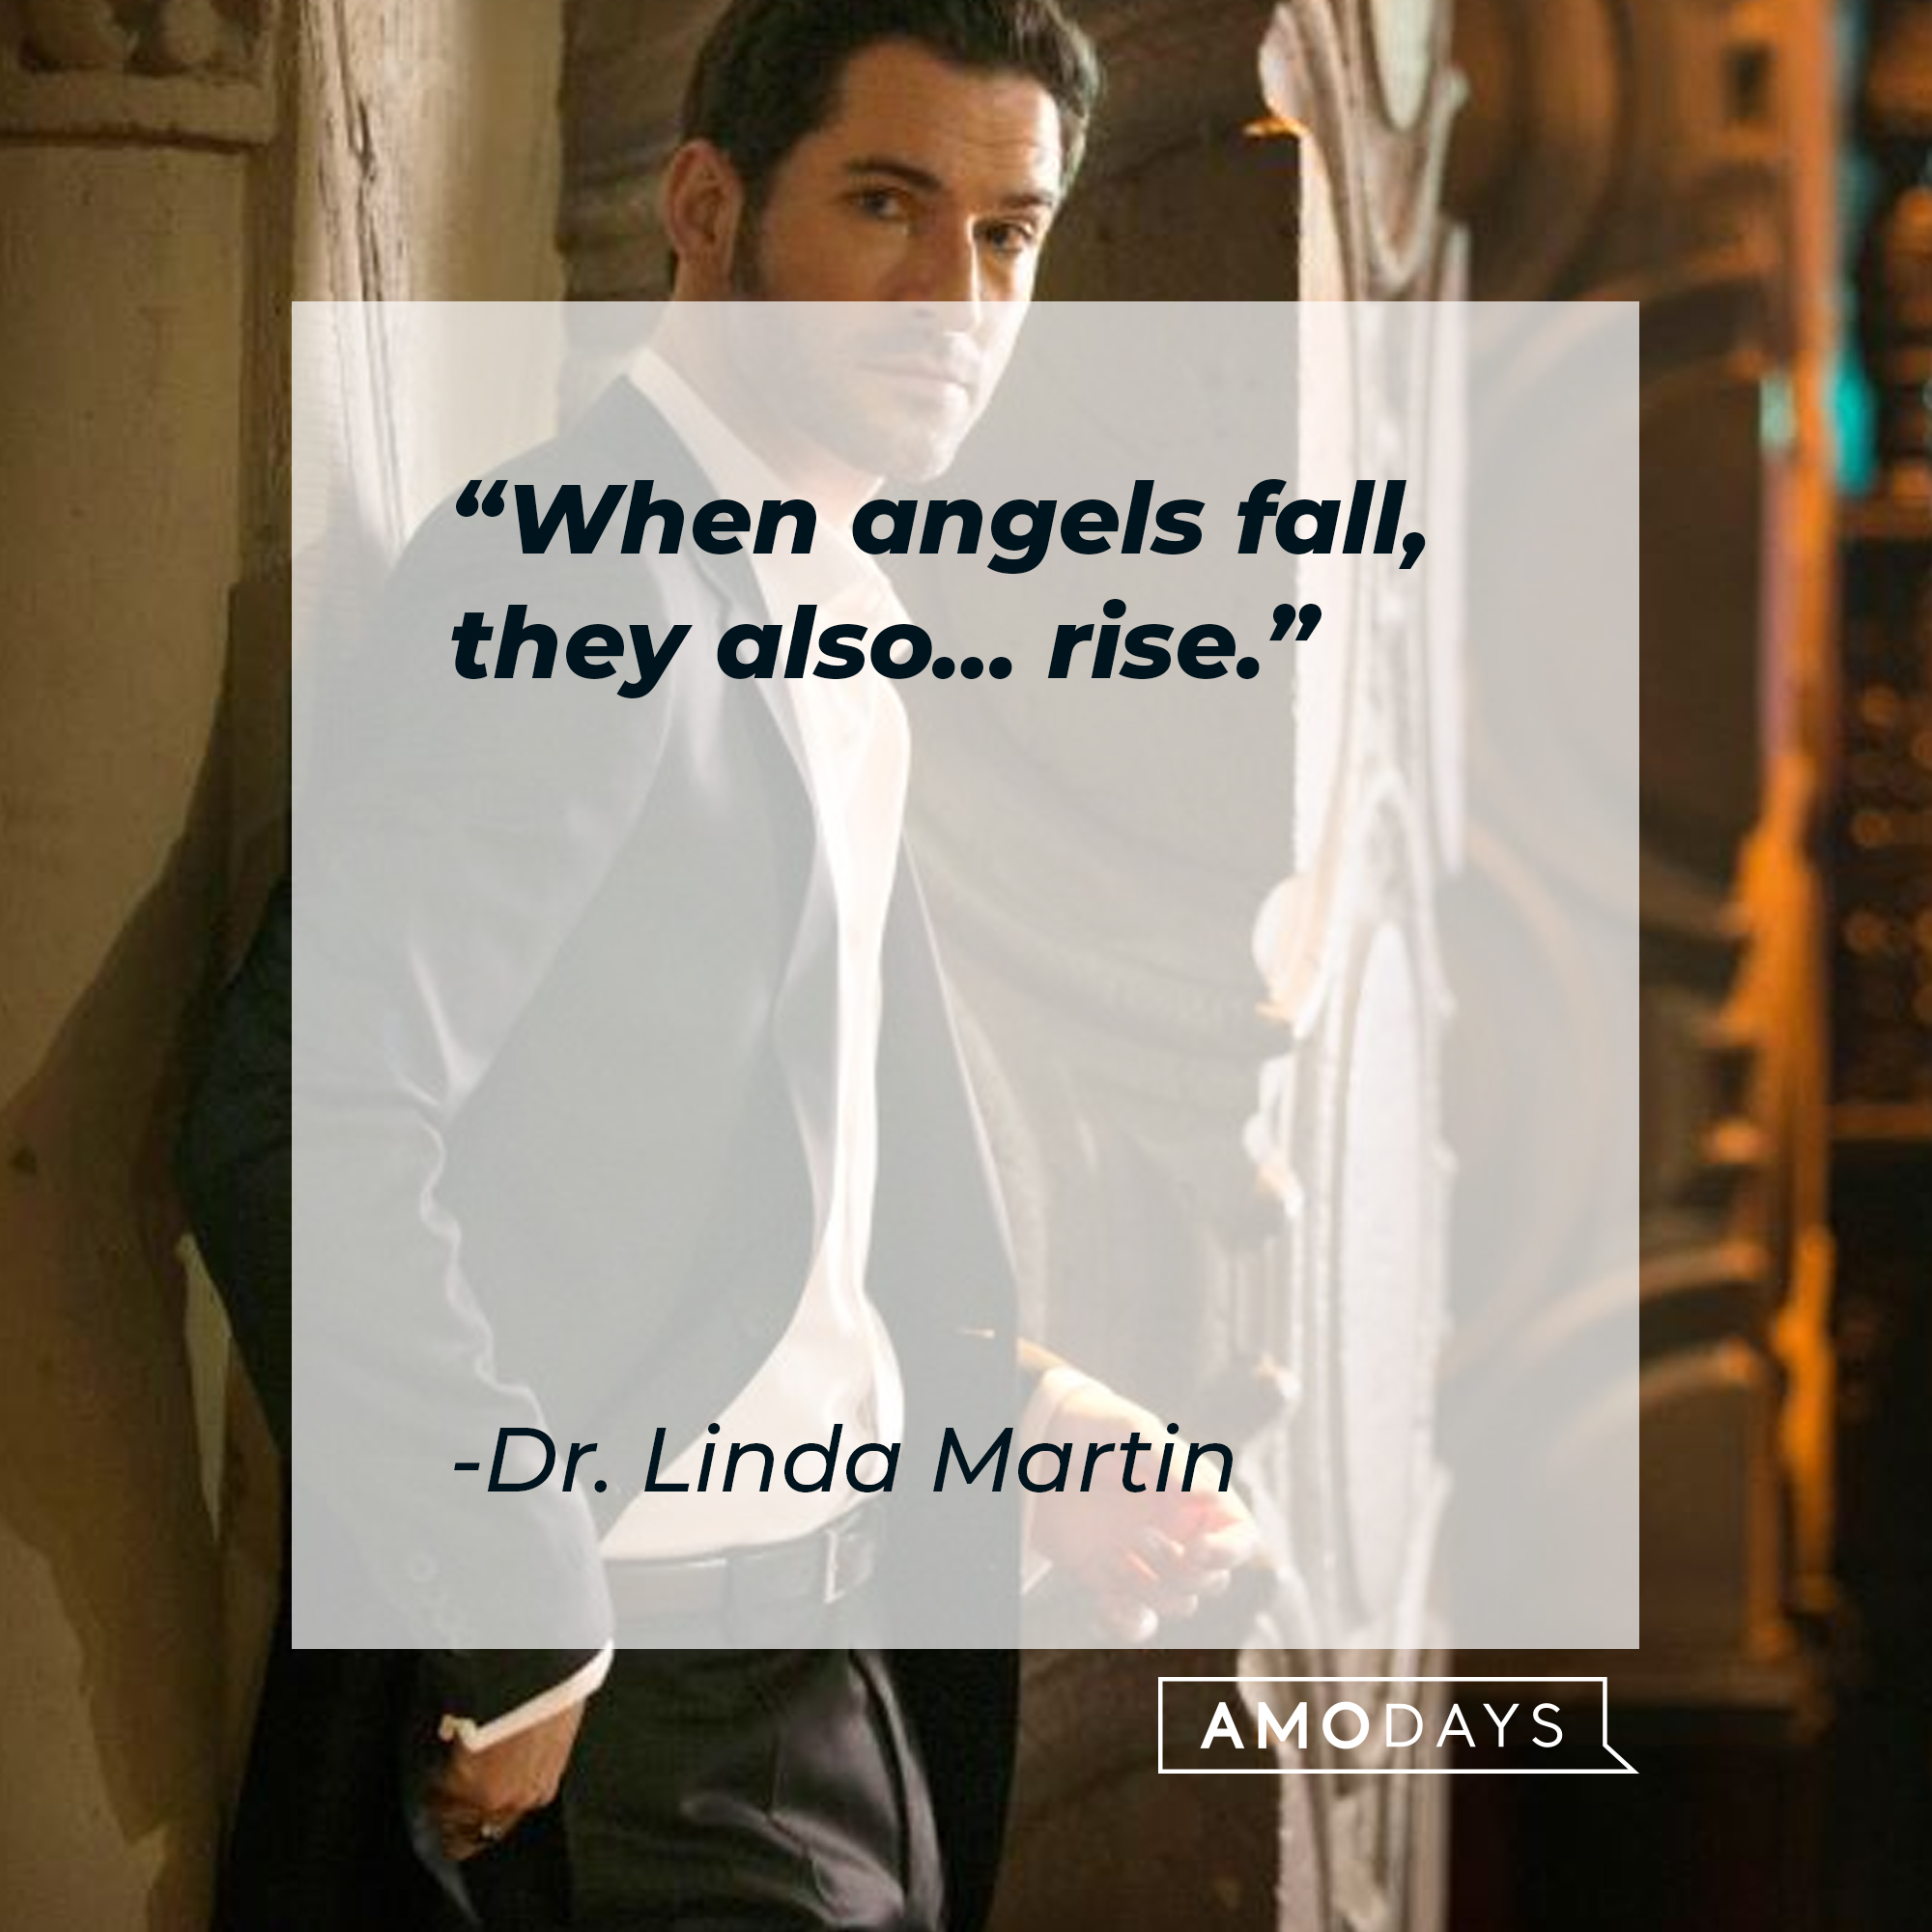 Dr. Linda Martin’s quote: "When angels fall, they also… rise." | Source: Facebook.com/LuciferNetflix